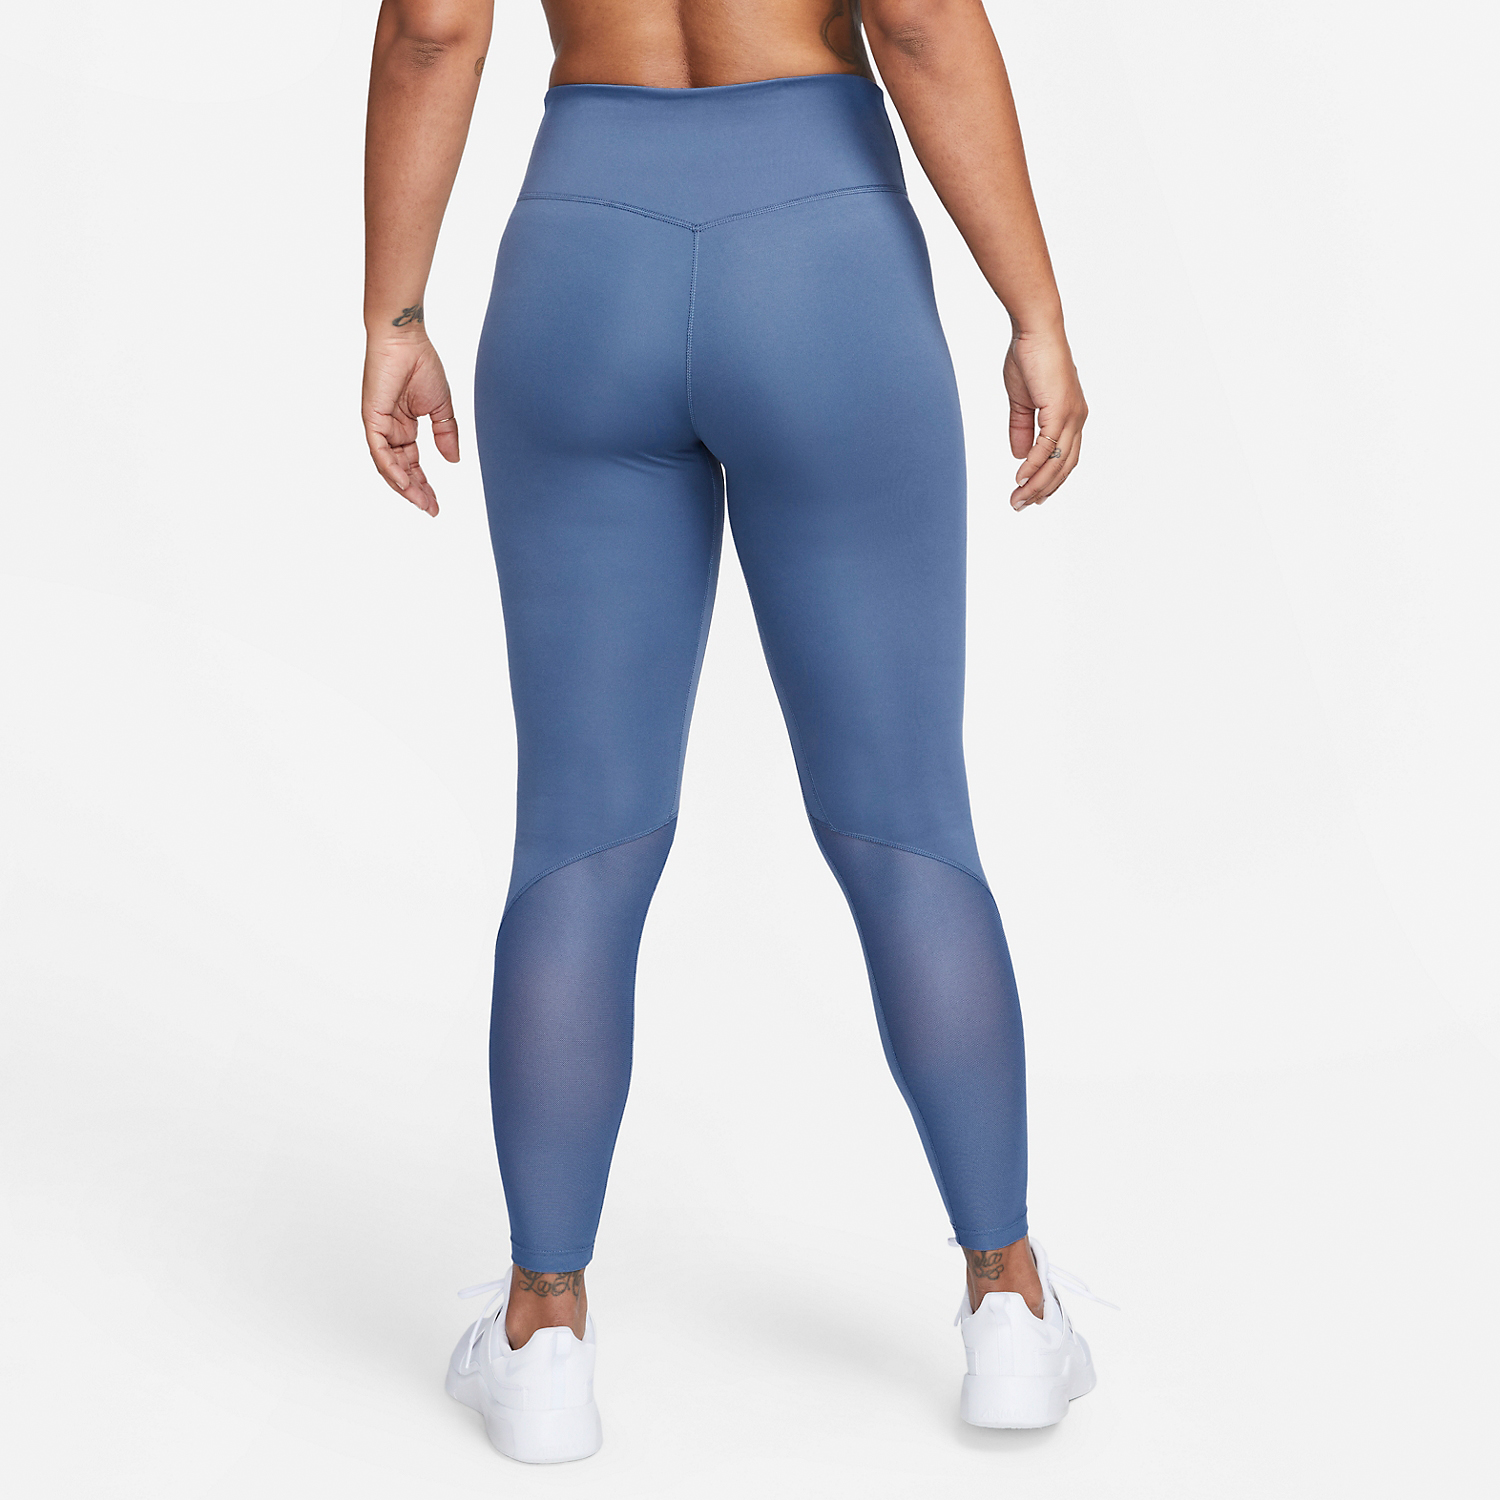 Nike One Mid Rise 7/8 Women's Tennis Tights - Diffused Blue